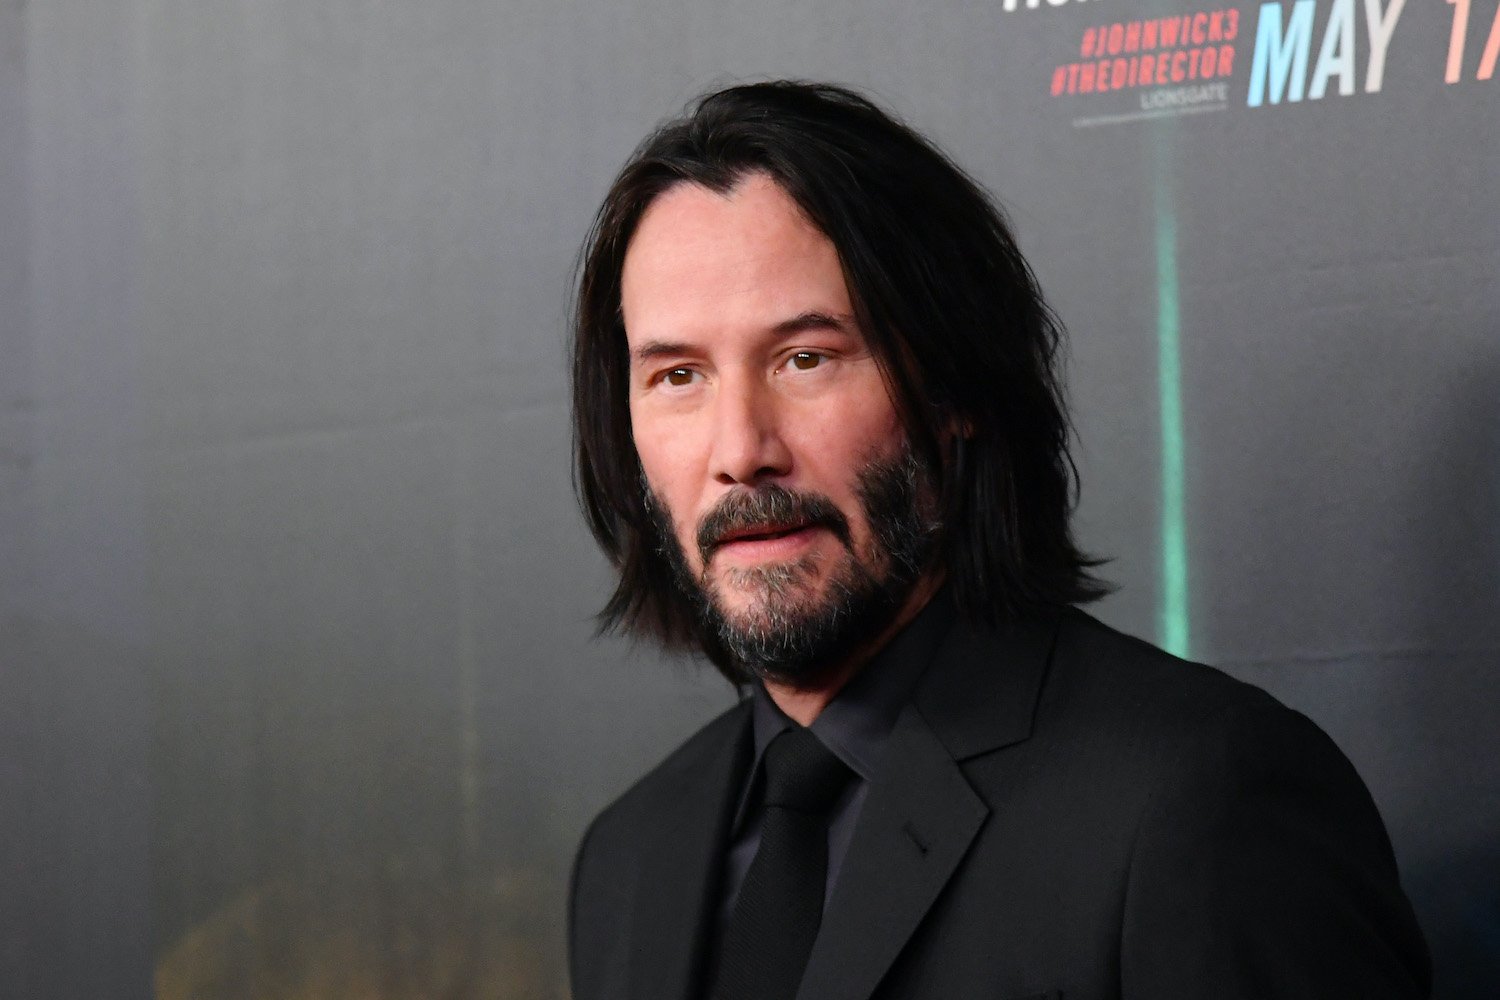 Keanu Reeves attends the John Wick: Chapter 3 world premiere in New York City